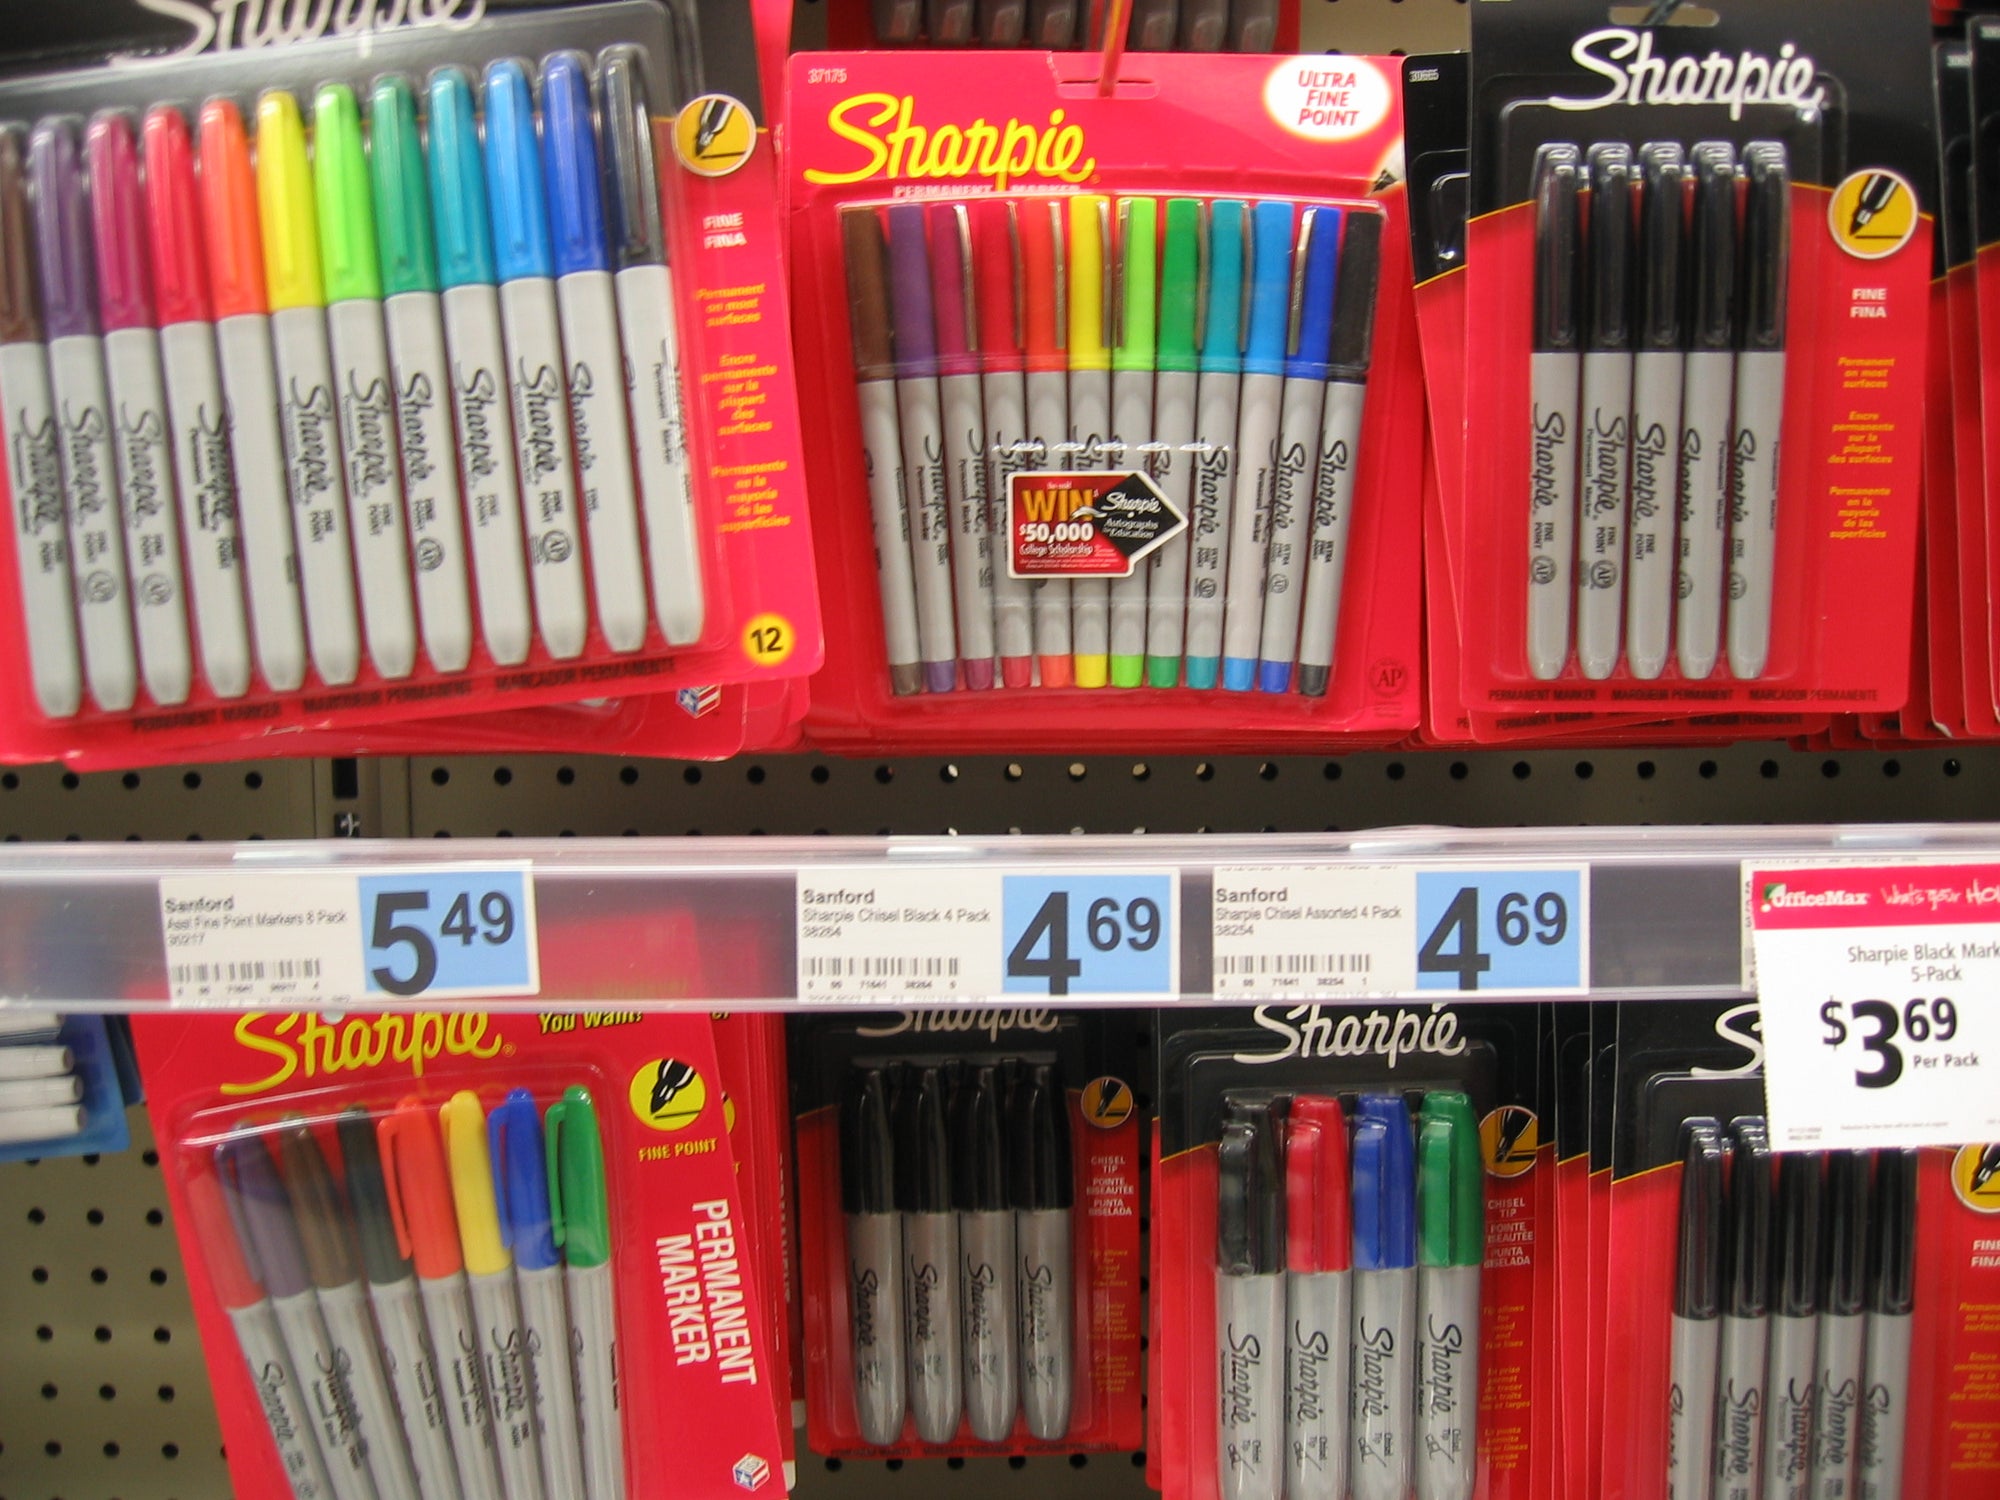 Understanding the Difference Between a Sharpie and a Paint Pen